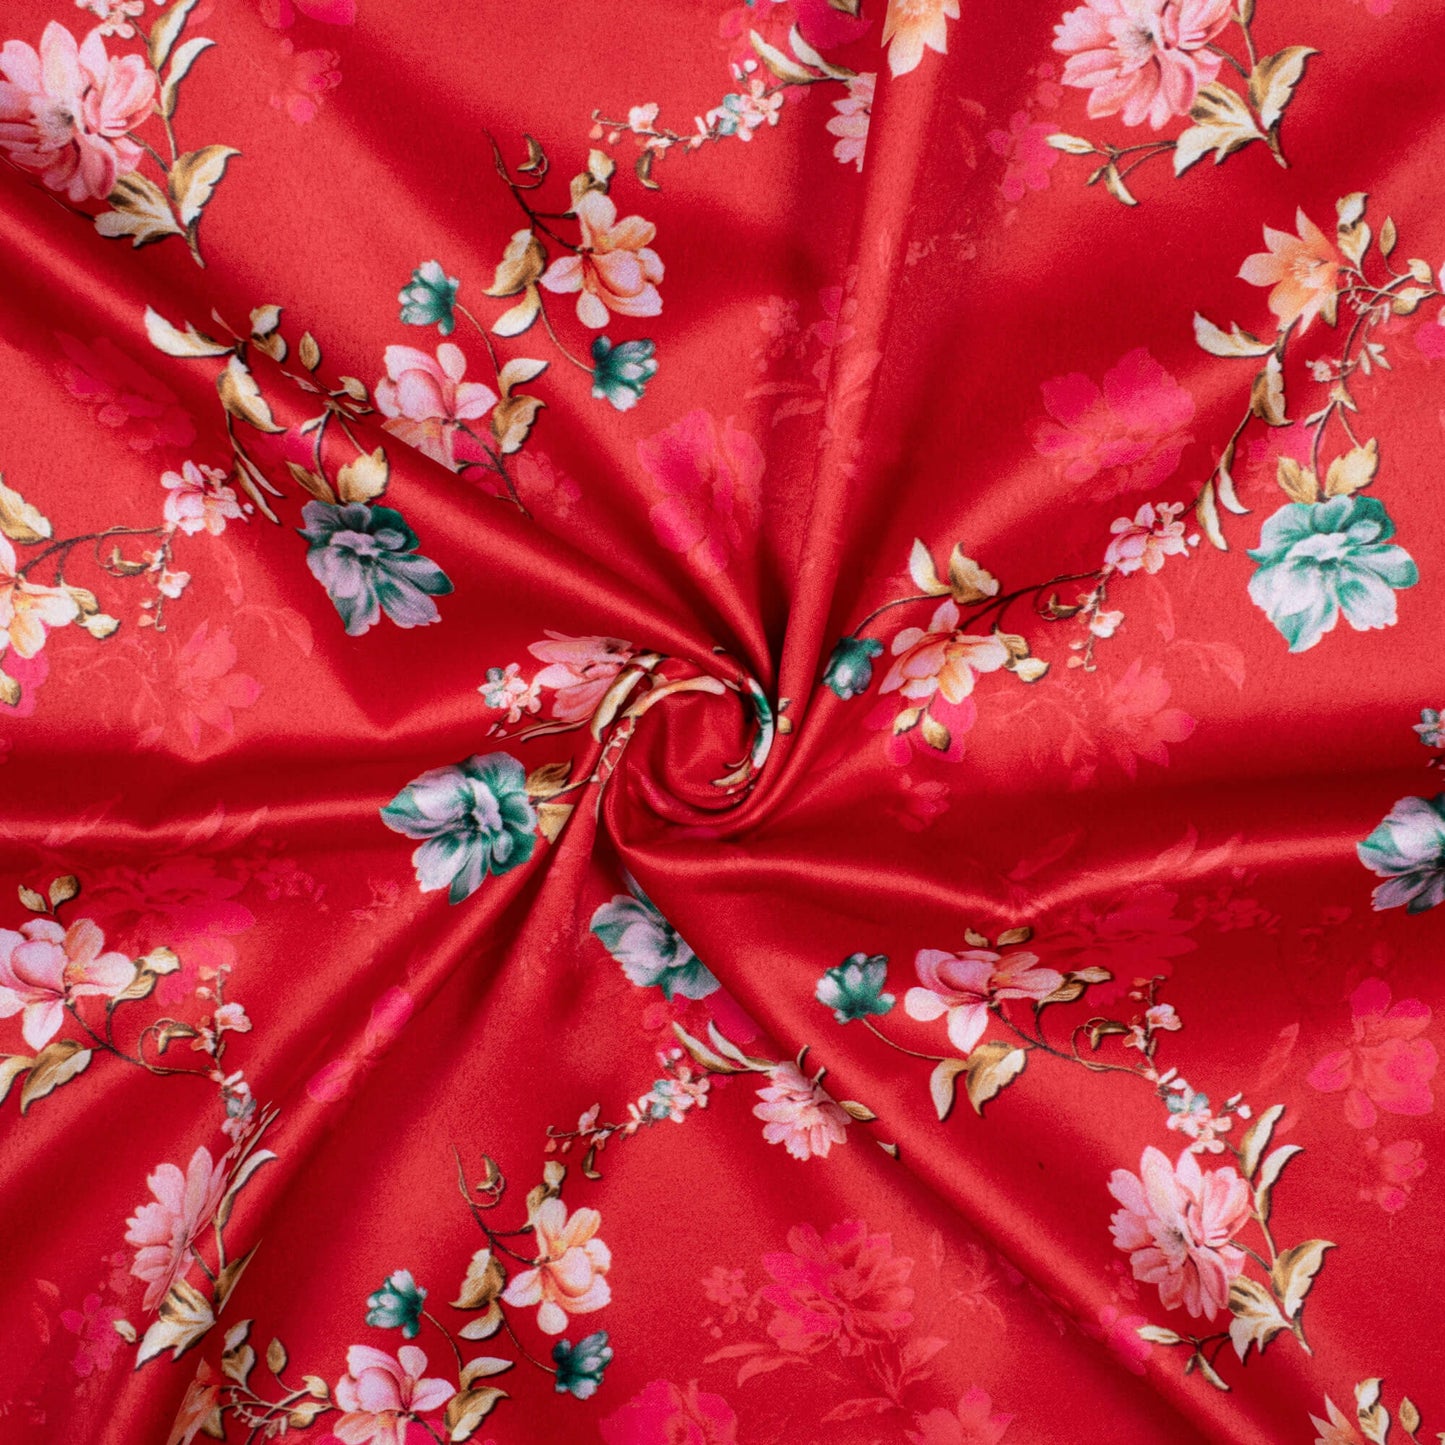 Sangria Red And Taffy Pink Floral Pattern Digital Print Charmeuse Satin Fabric (Width 58 Inches)